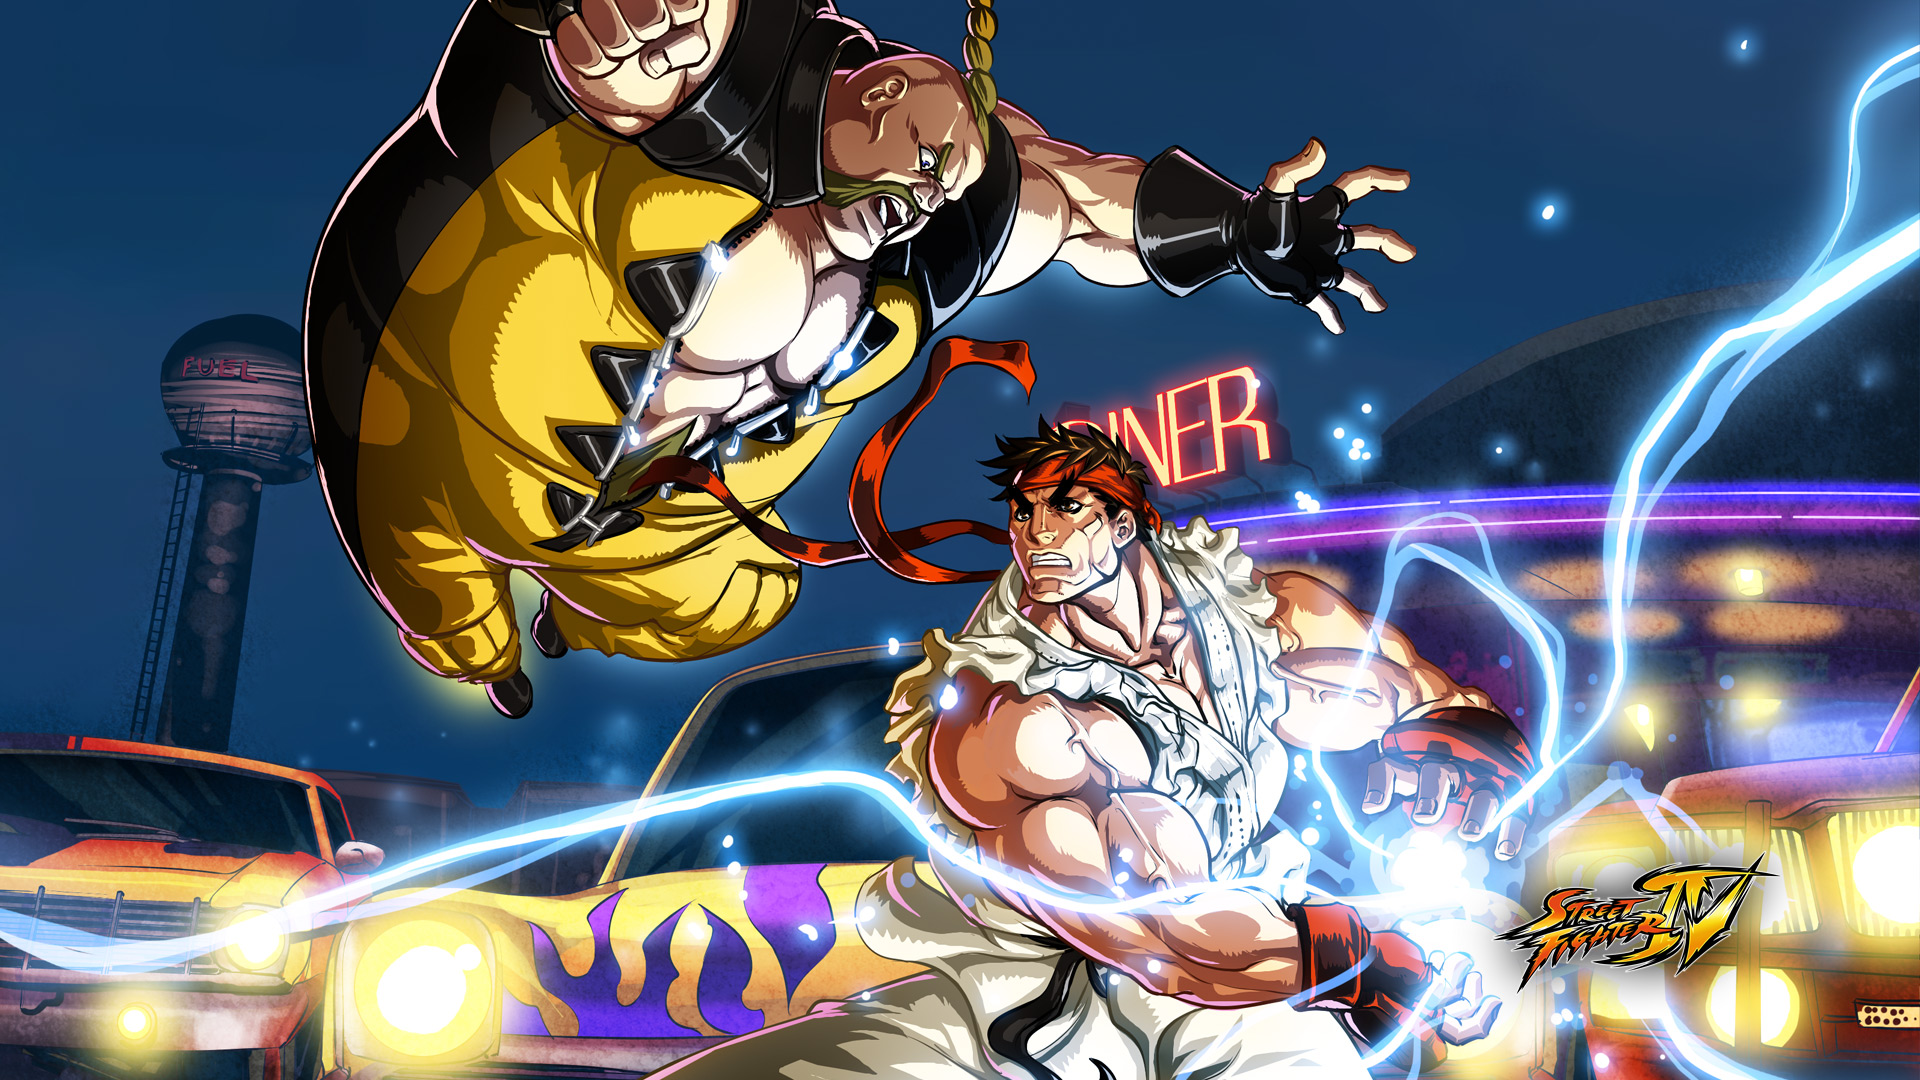 Wallpapers Of The Day Street Fighter 1920x1080 Street Fighter Pic